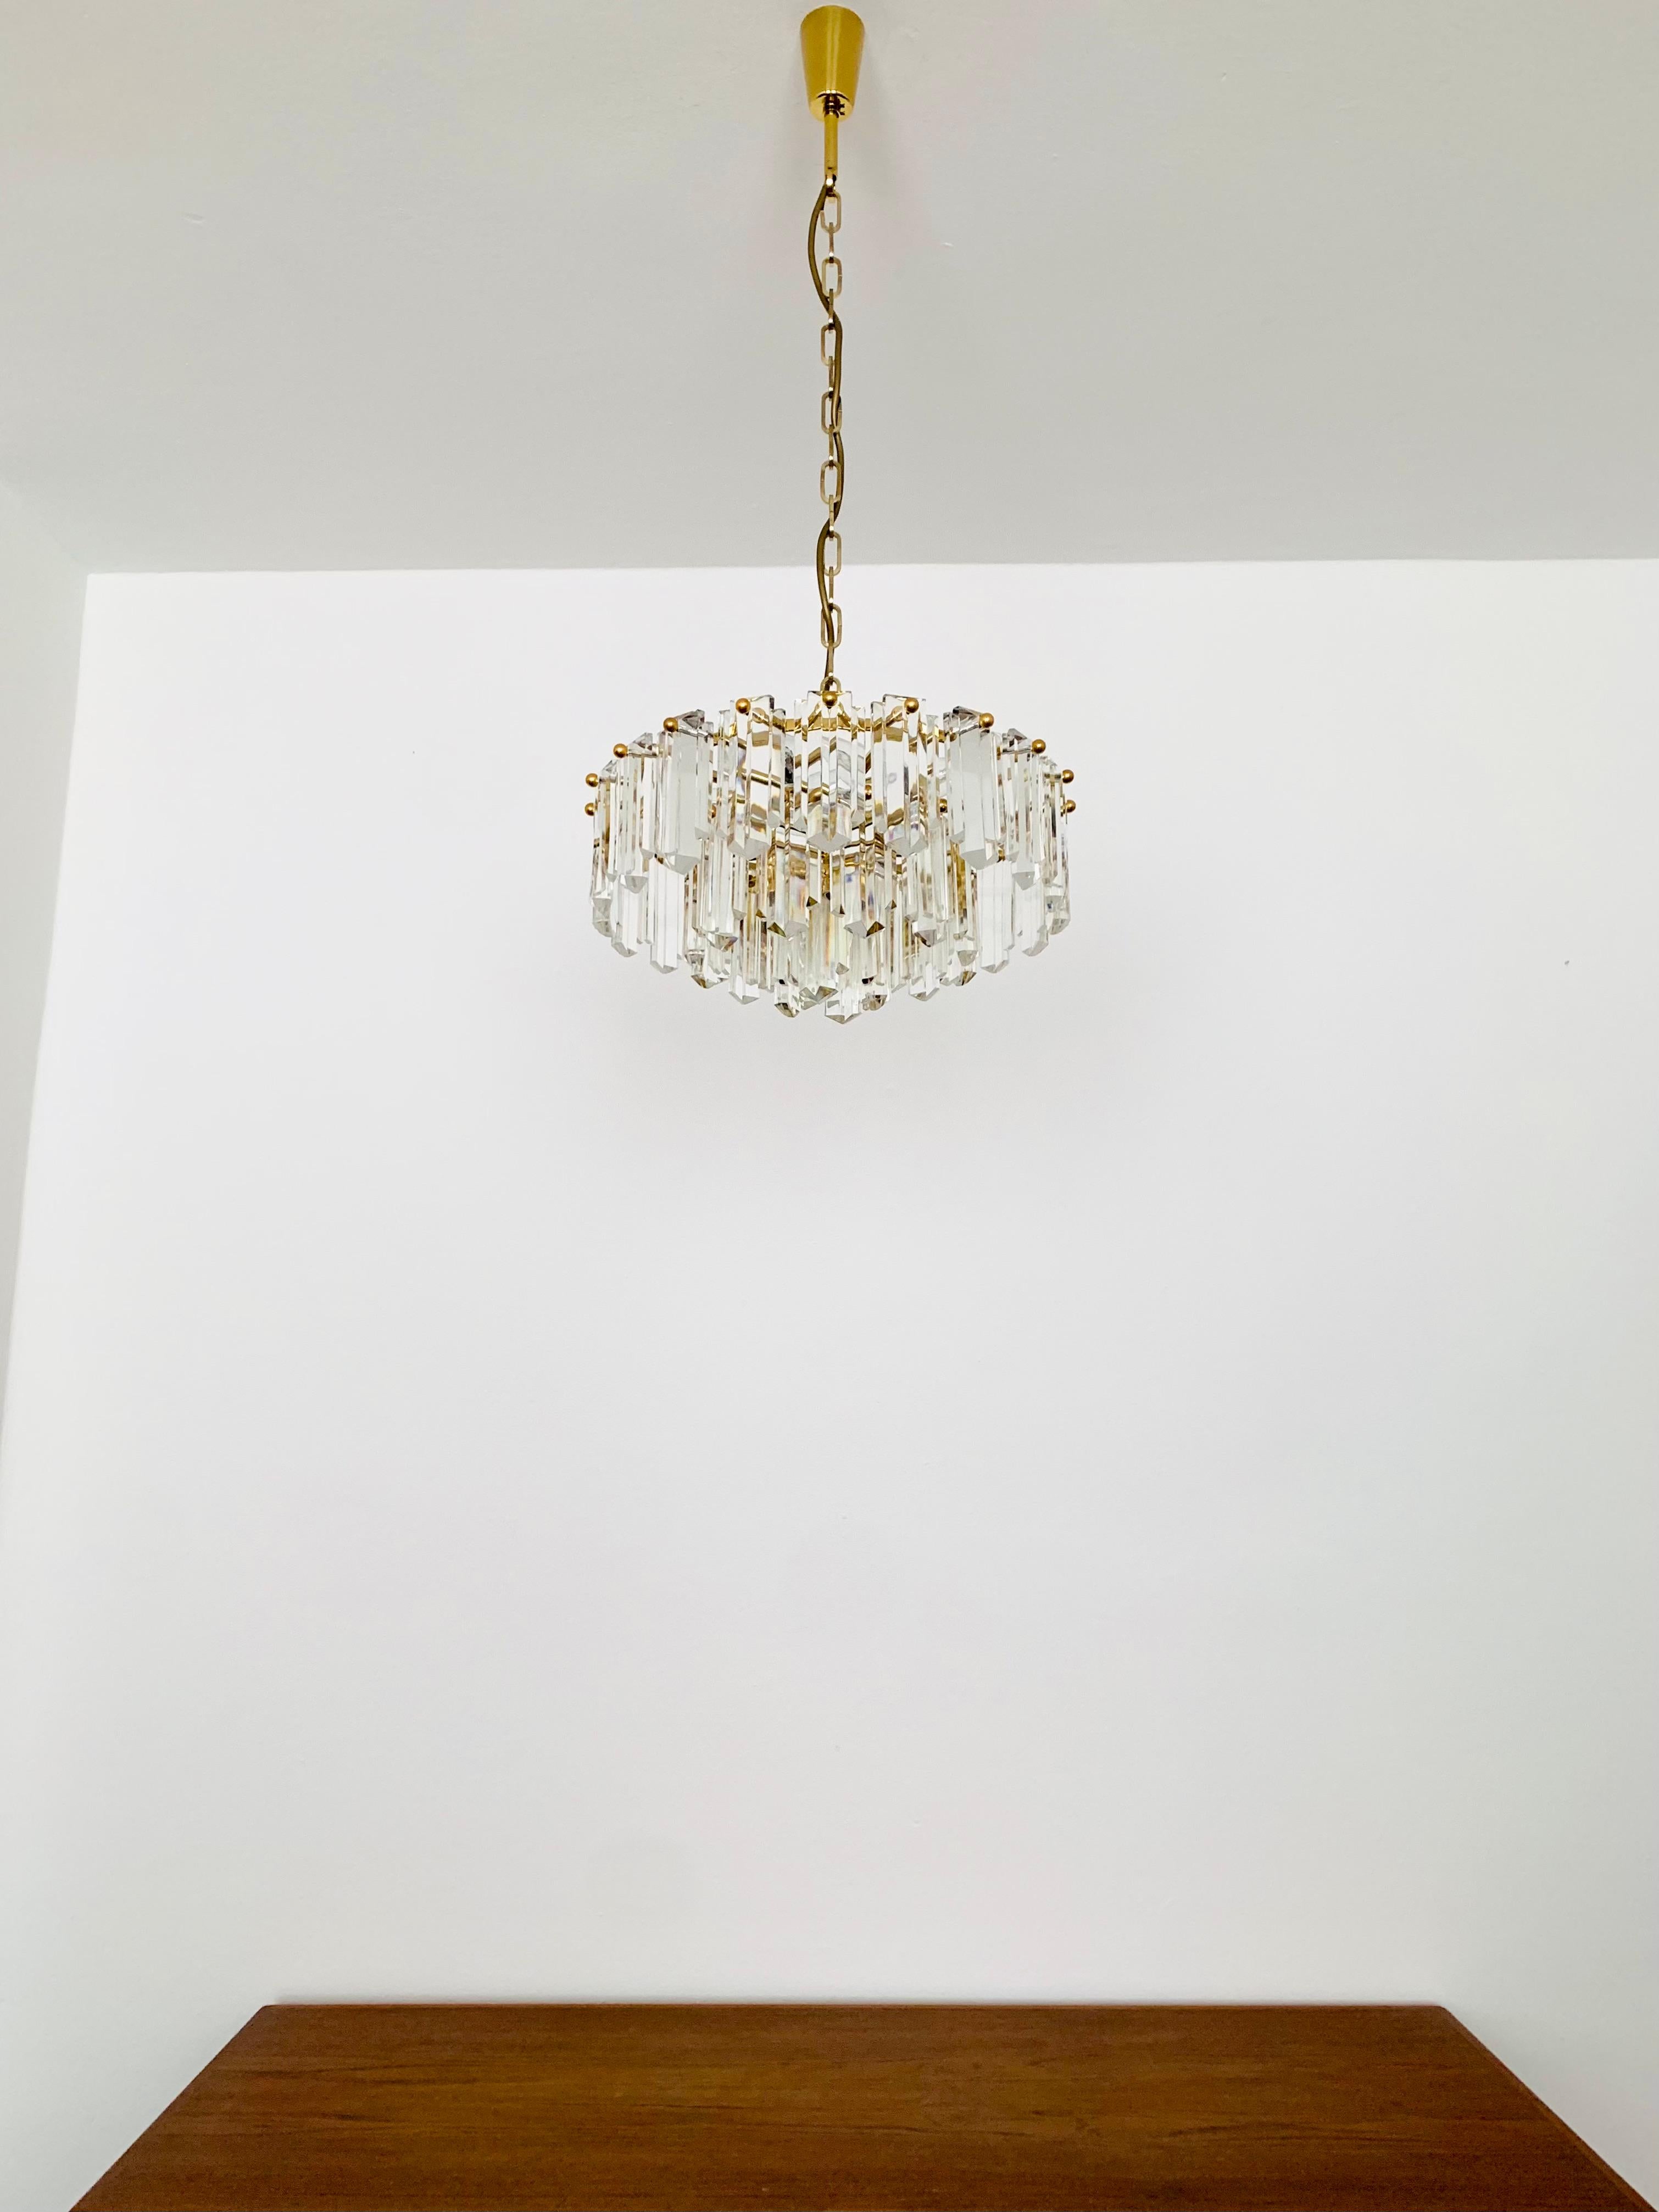 Mid-20th Century Art Deco Style Crystal Glass Chandelier by J.T. Kalmar For Sale